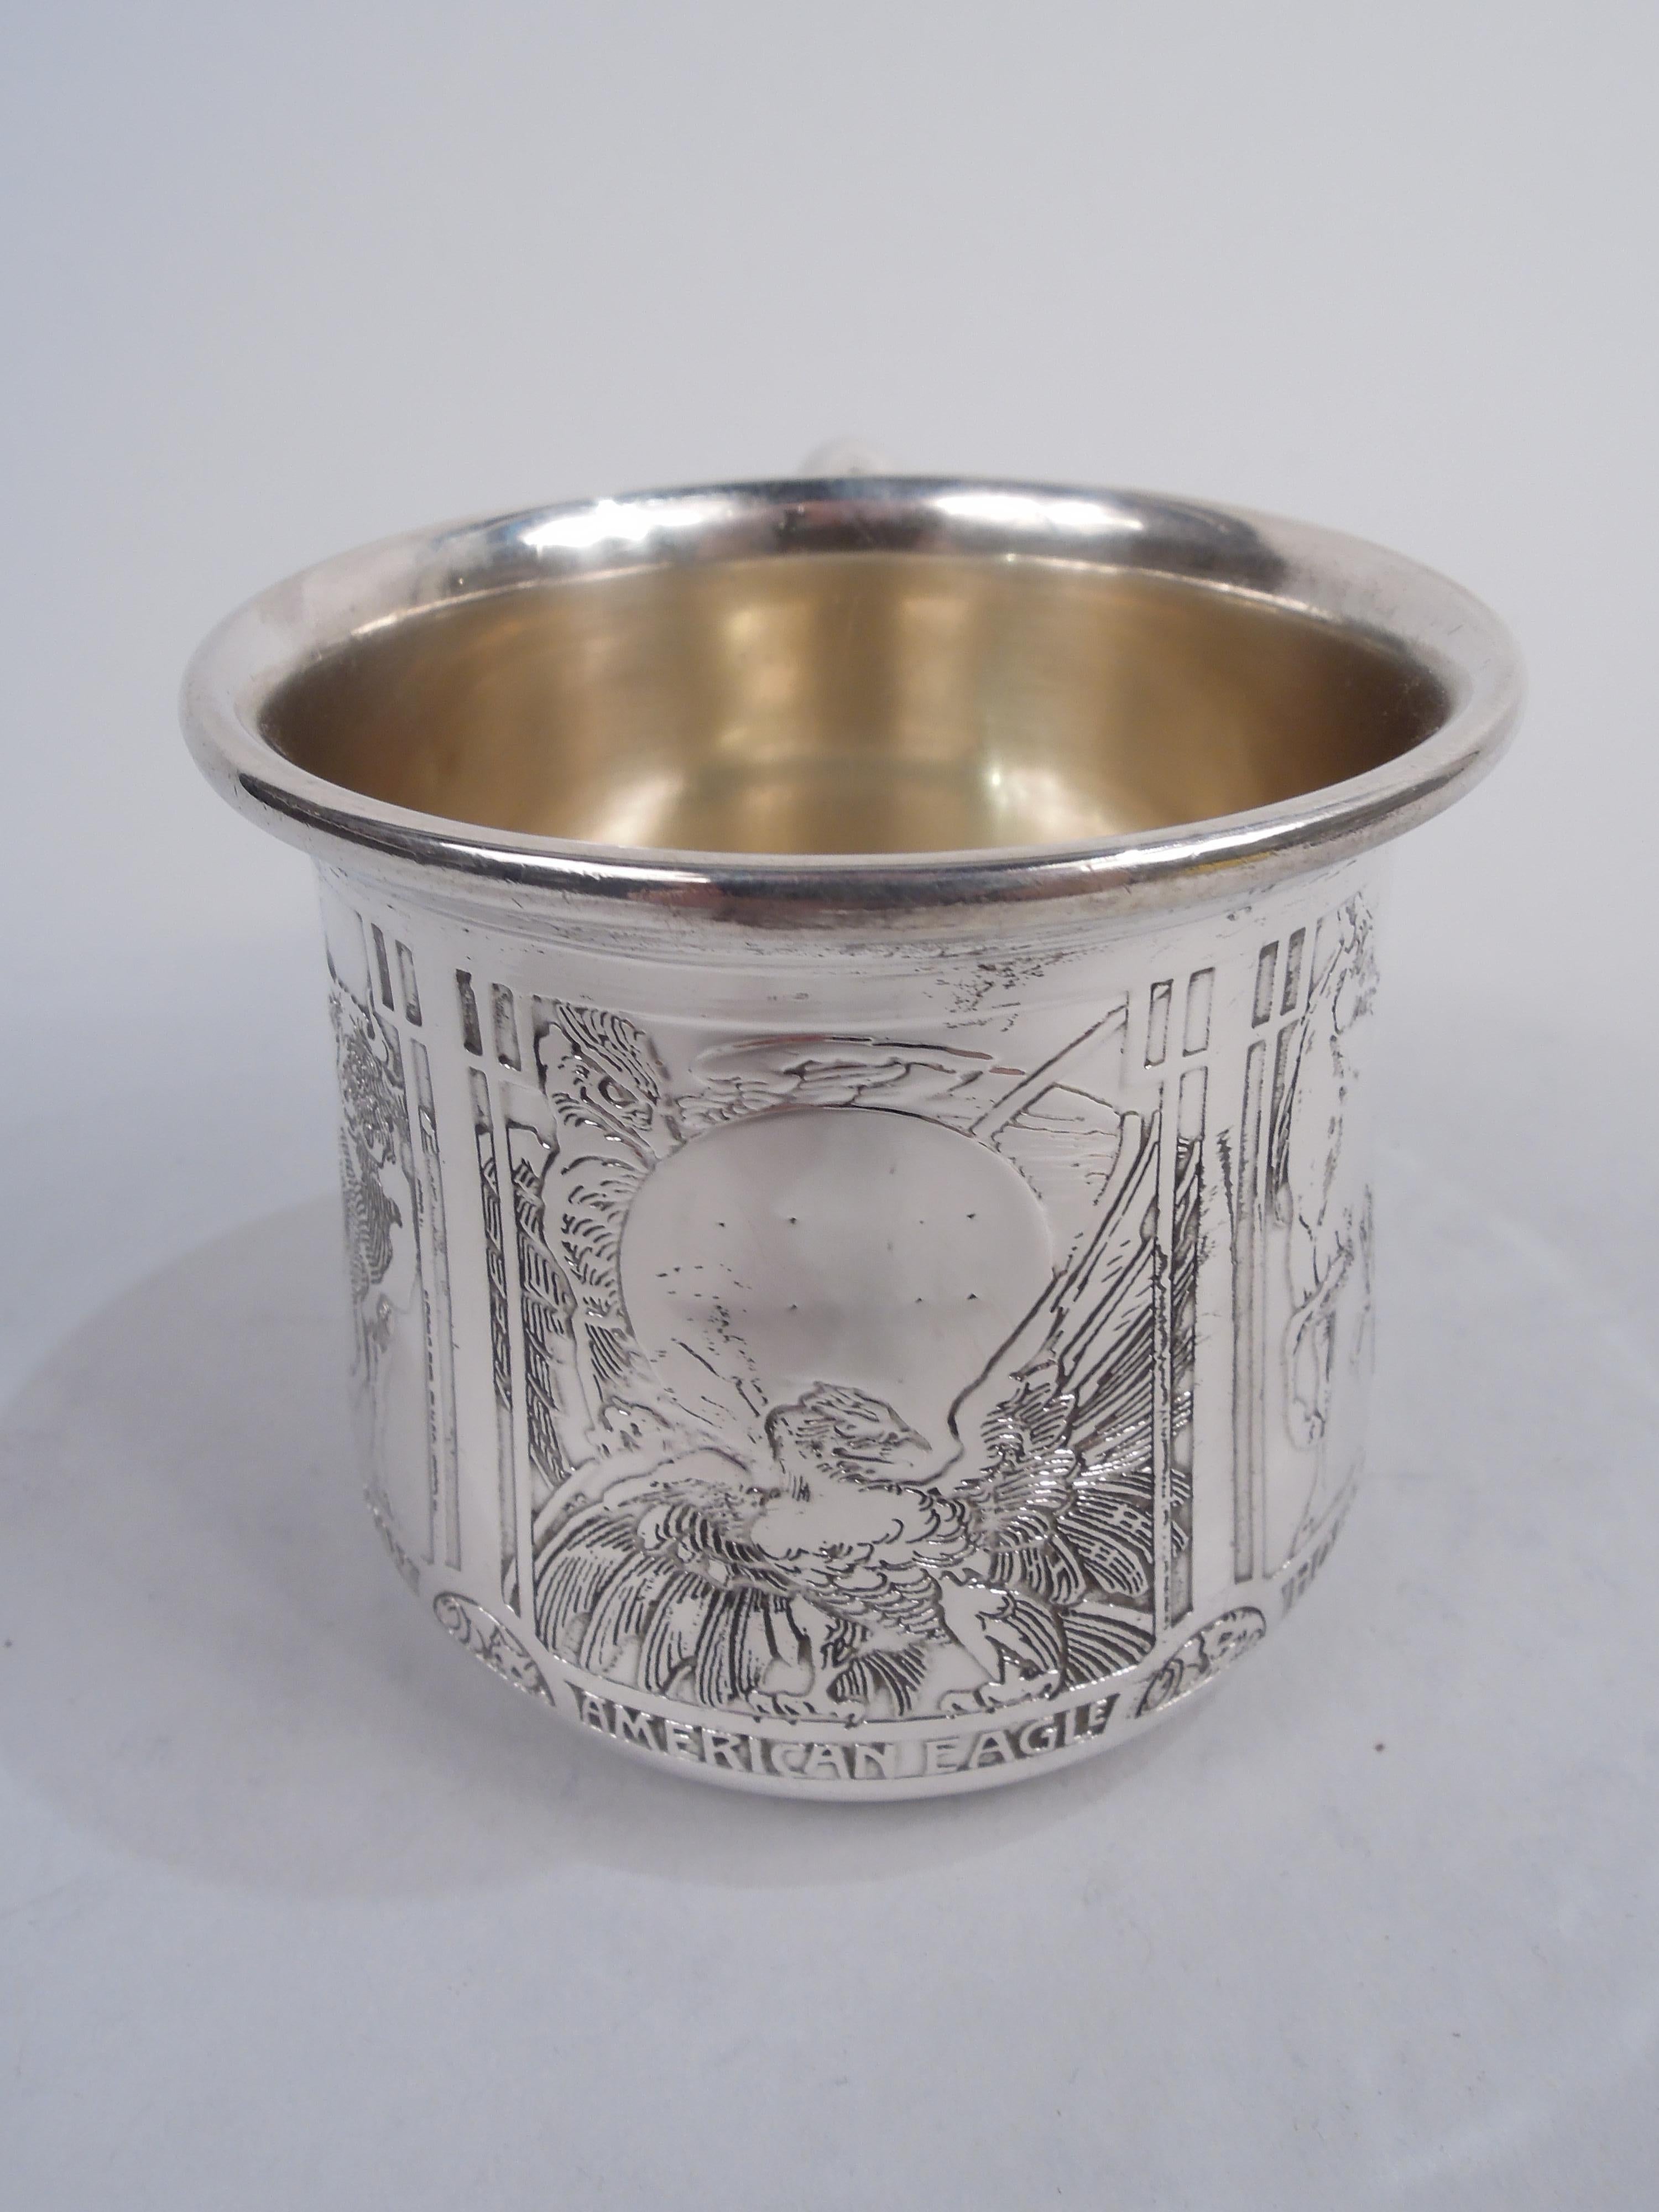 Edwardian sterling silver baby cup. Made by William B. Kerr in Newark, ca 1915. Upward tapering sides and scroll handle. Acid etched frames with animals, including an elephant, camel, and gazelle. Frame with American eagle has vacant space for